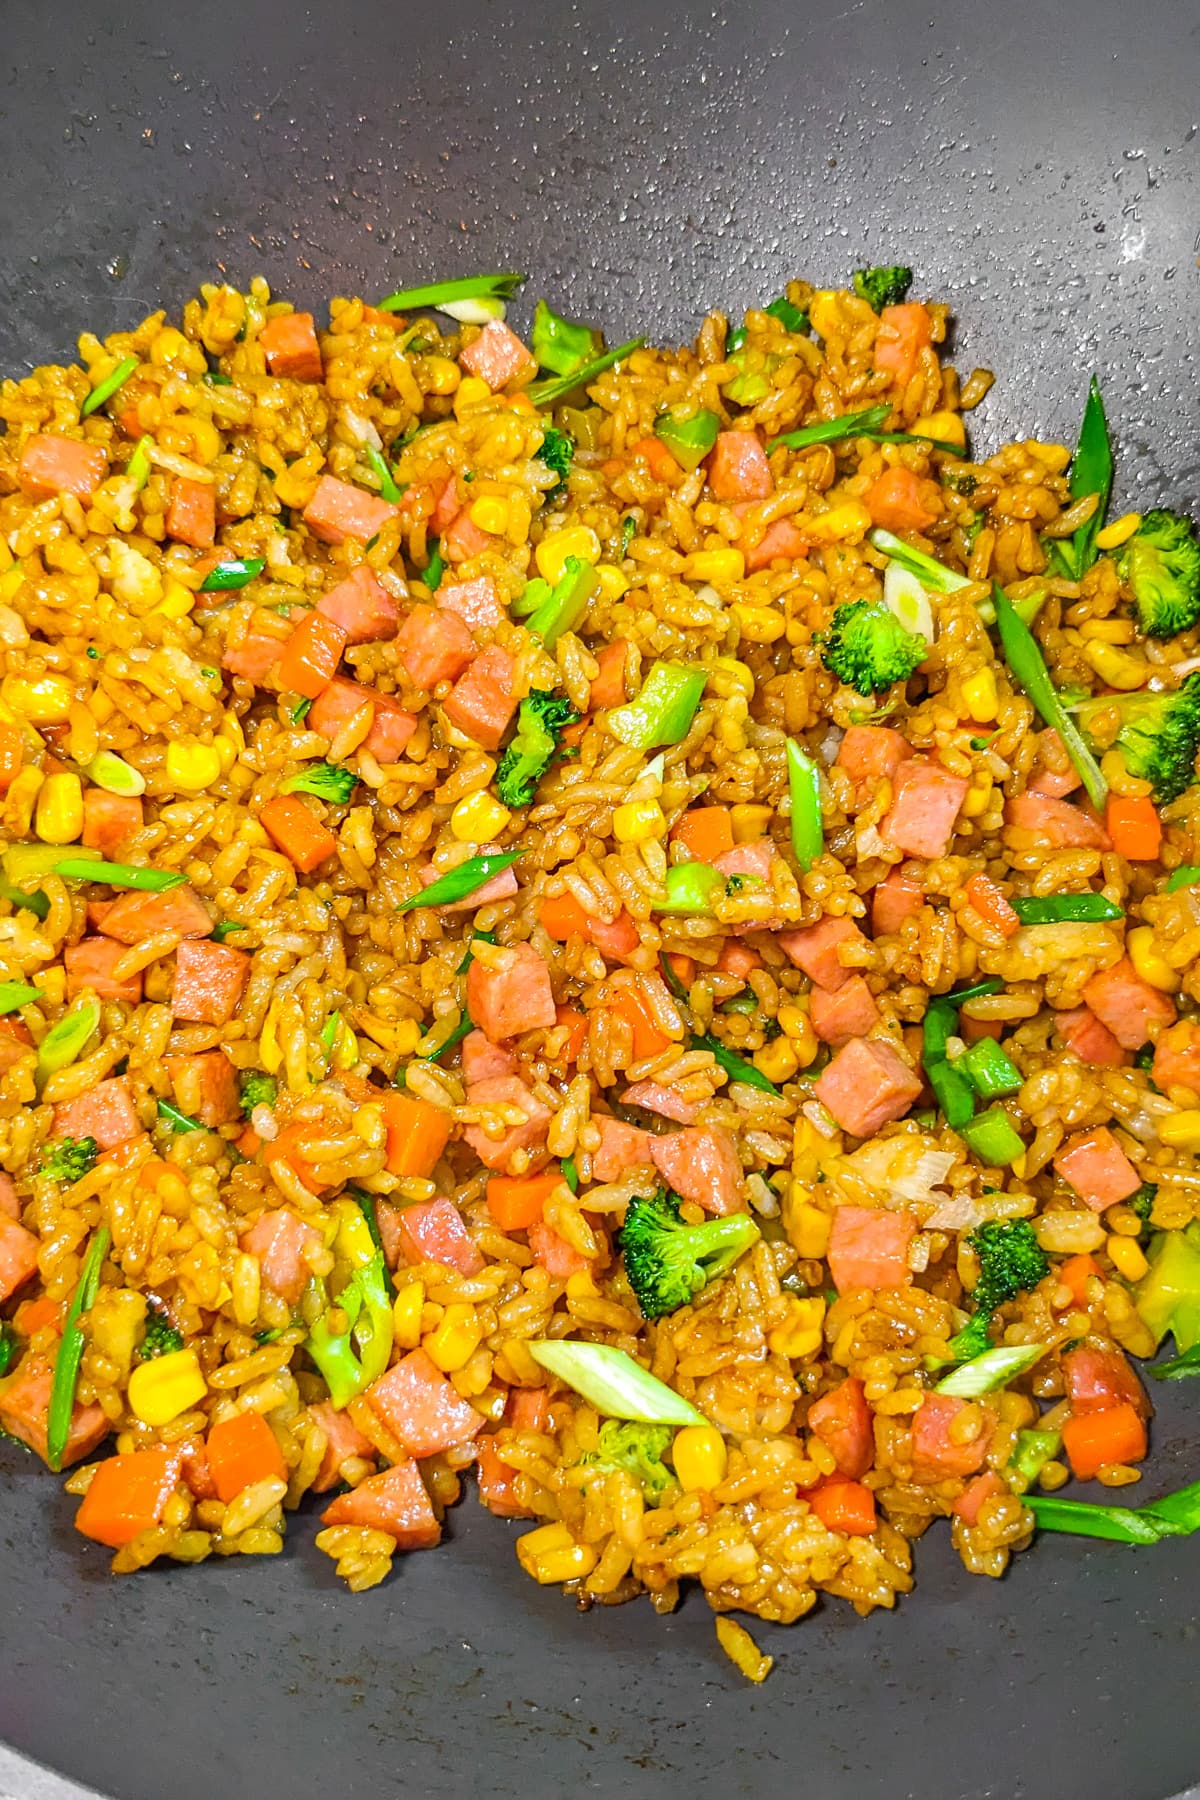 Wok with luncheon meat, corn, broccoli and spring onions.